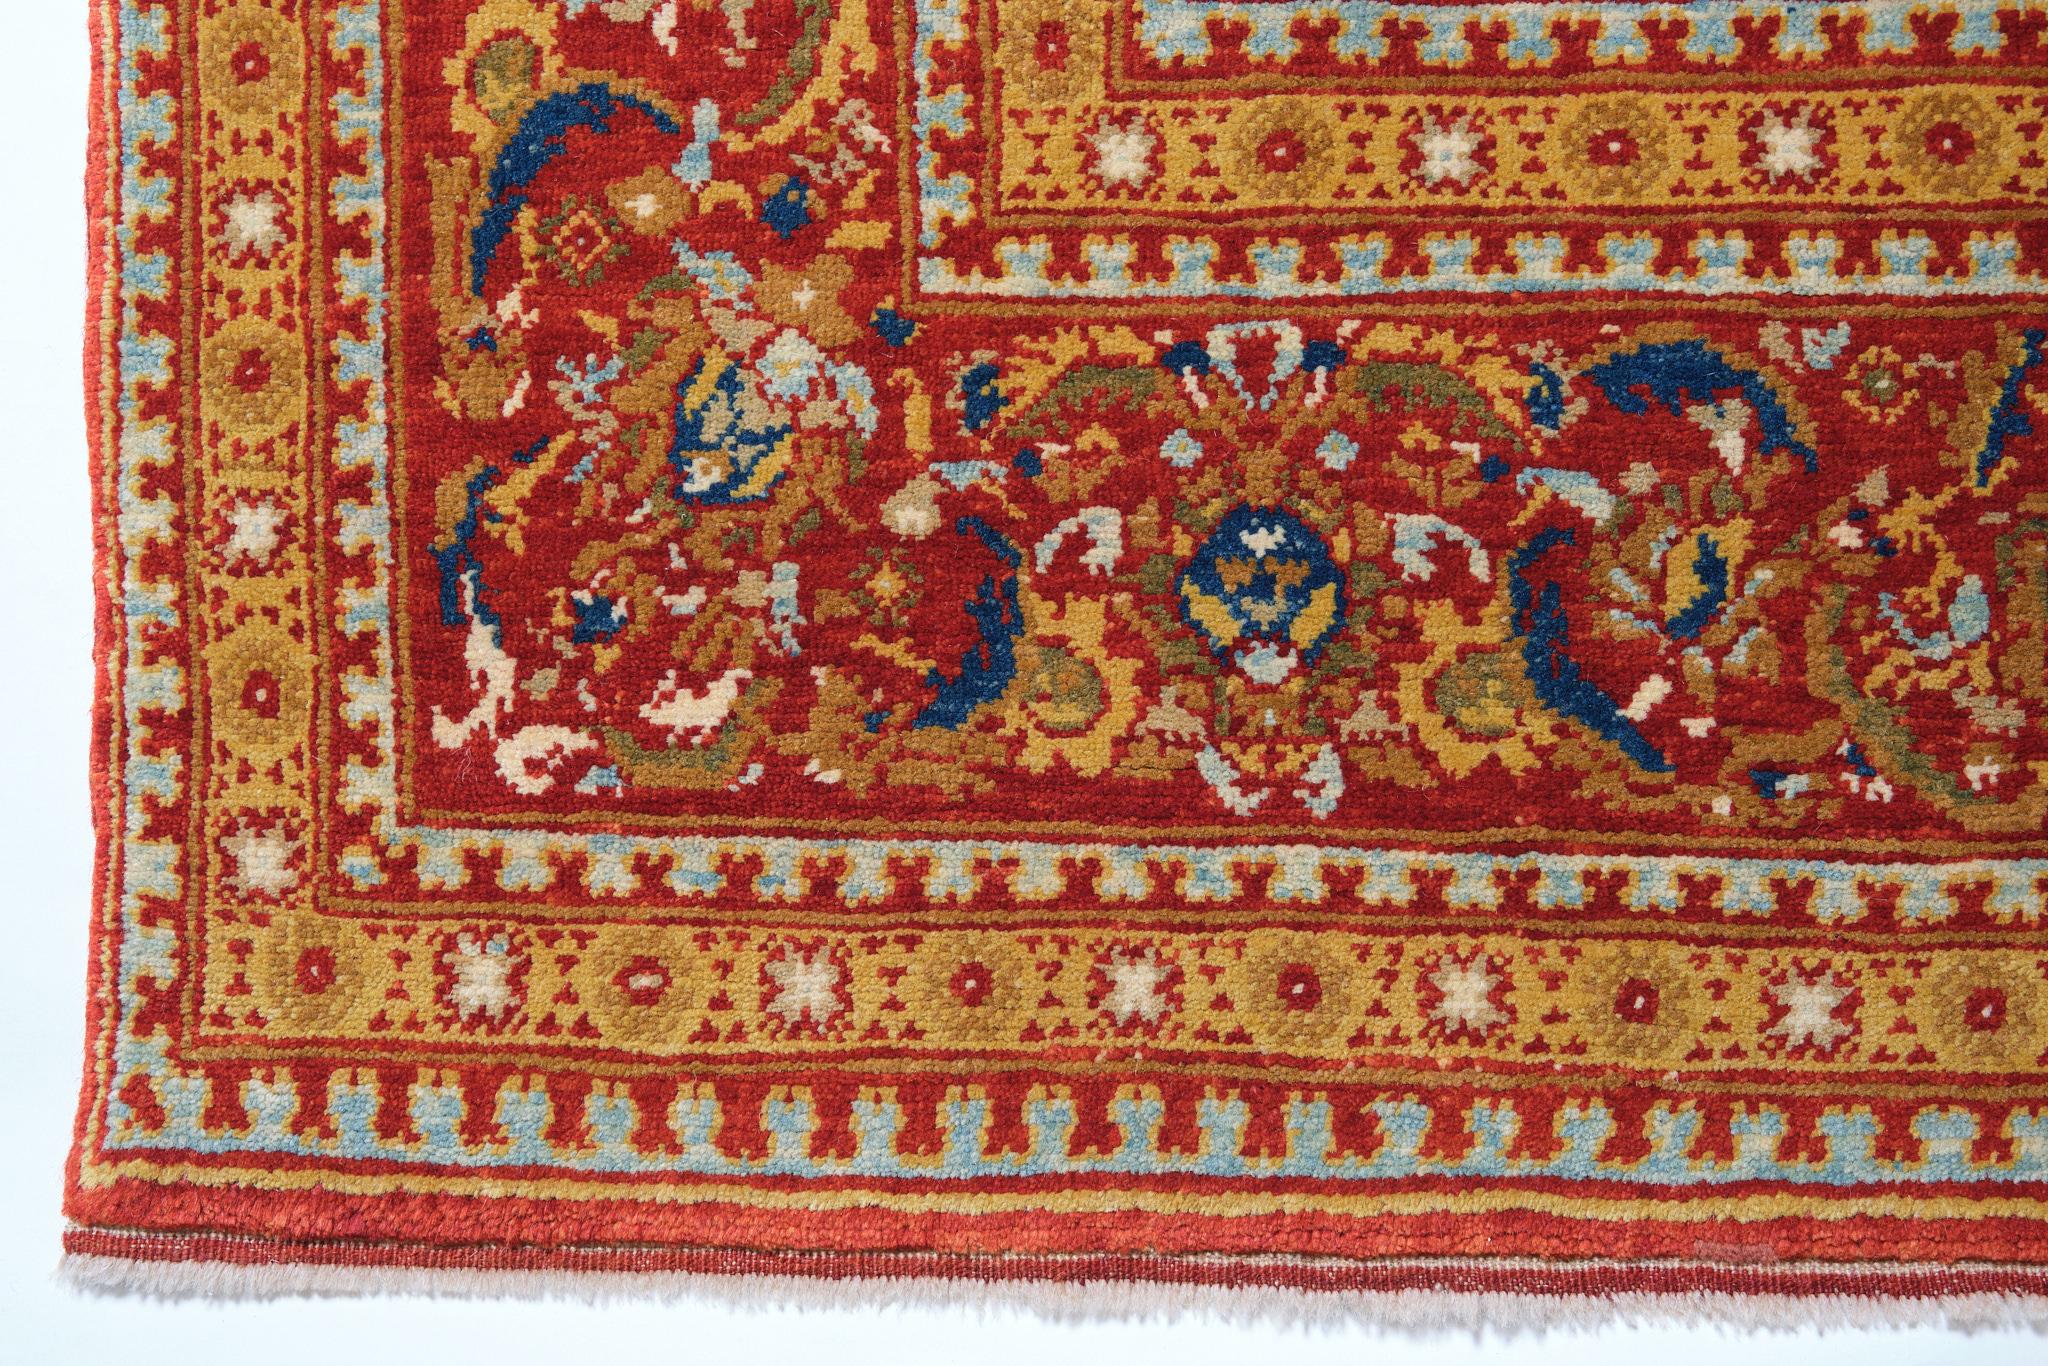 Turkish Court Manufactury Rugs were woven in the Egyptian workshops founded by Ottoman Empire in the 16th century. Those carpets were woven in Egypt, following the paper cartoons probably created in Istanbul and sent to Cairo at that time. Shortly